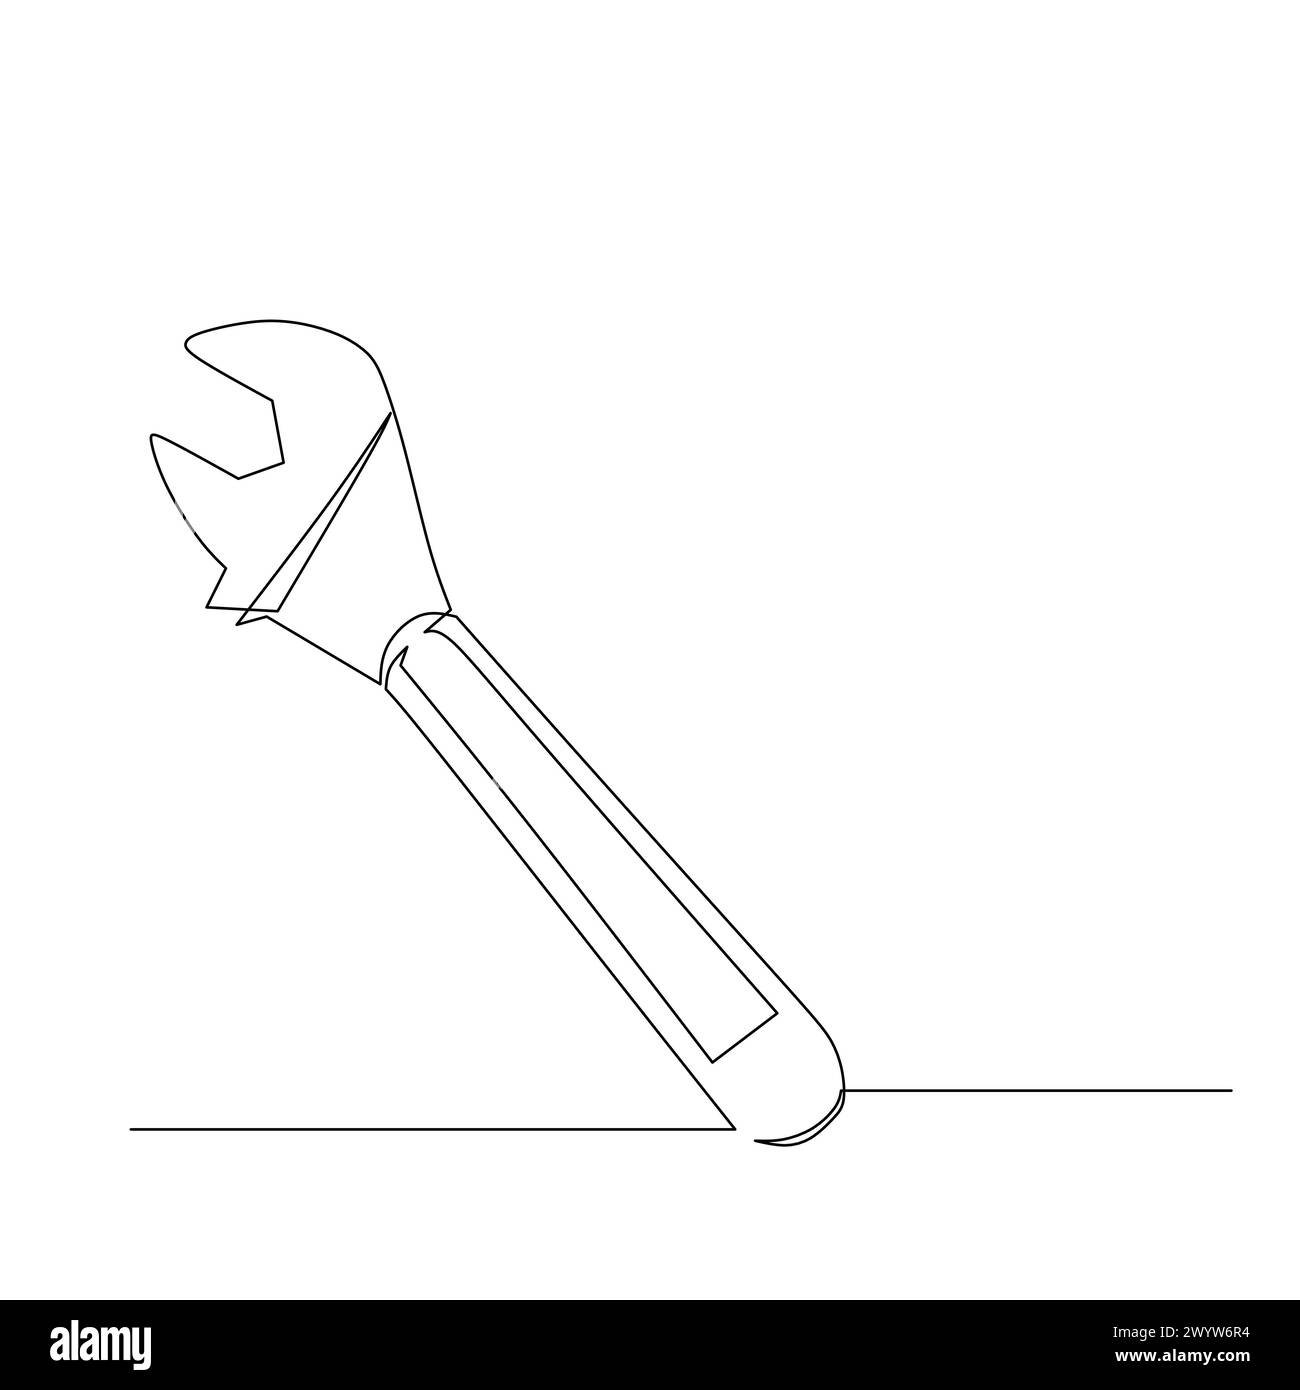 wrench Continuous line drawing. Simple modern hand drawn style illustration. Vector design for industrial engineering and construction theme Stock Vector